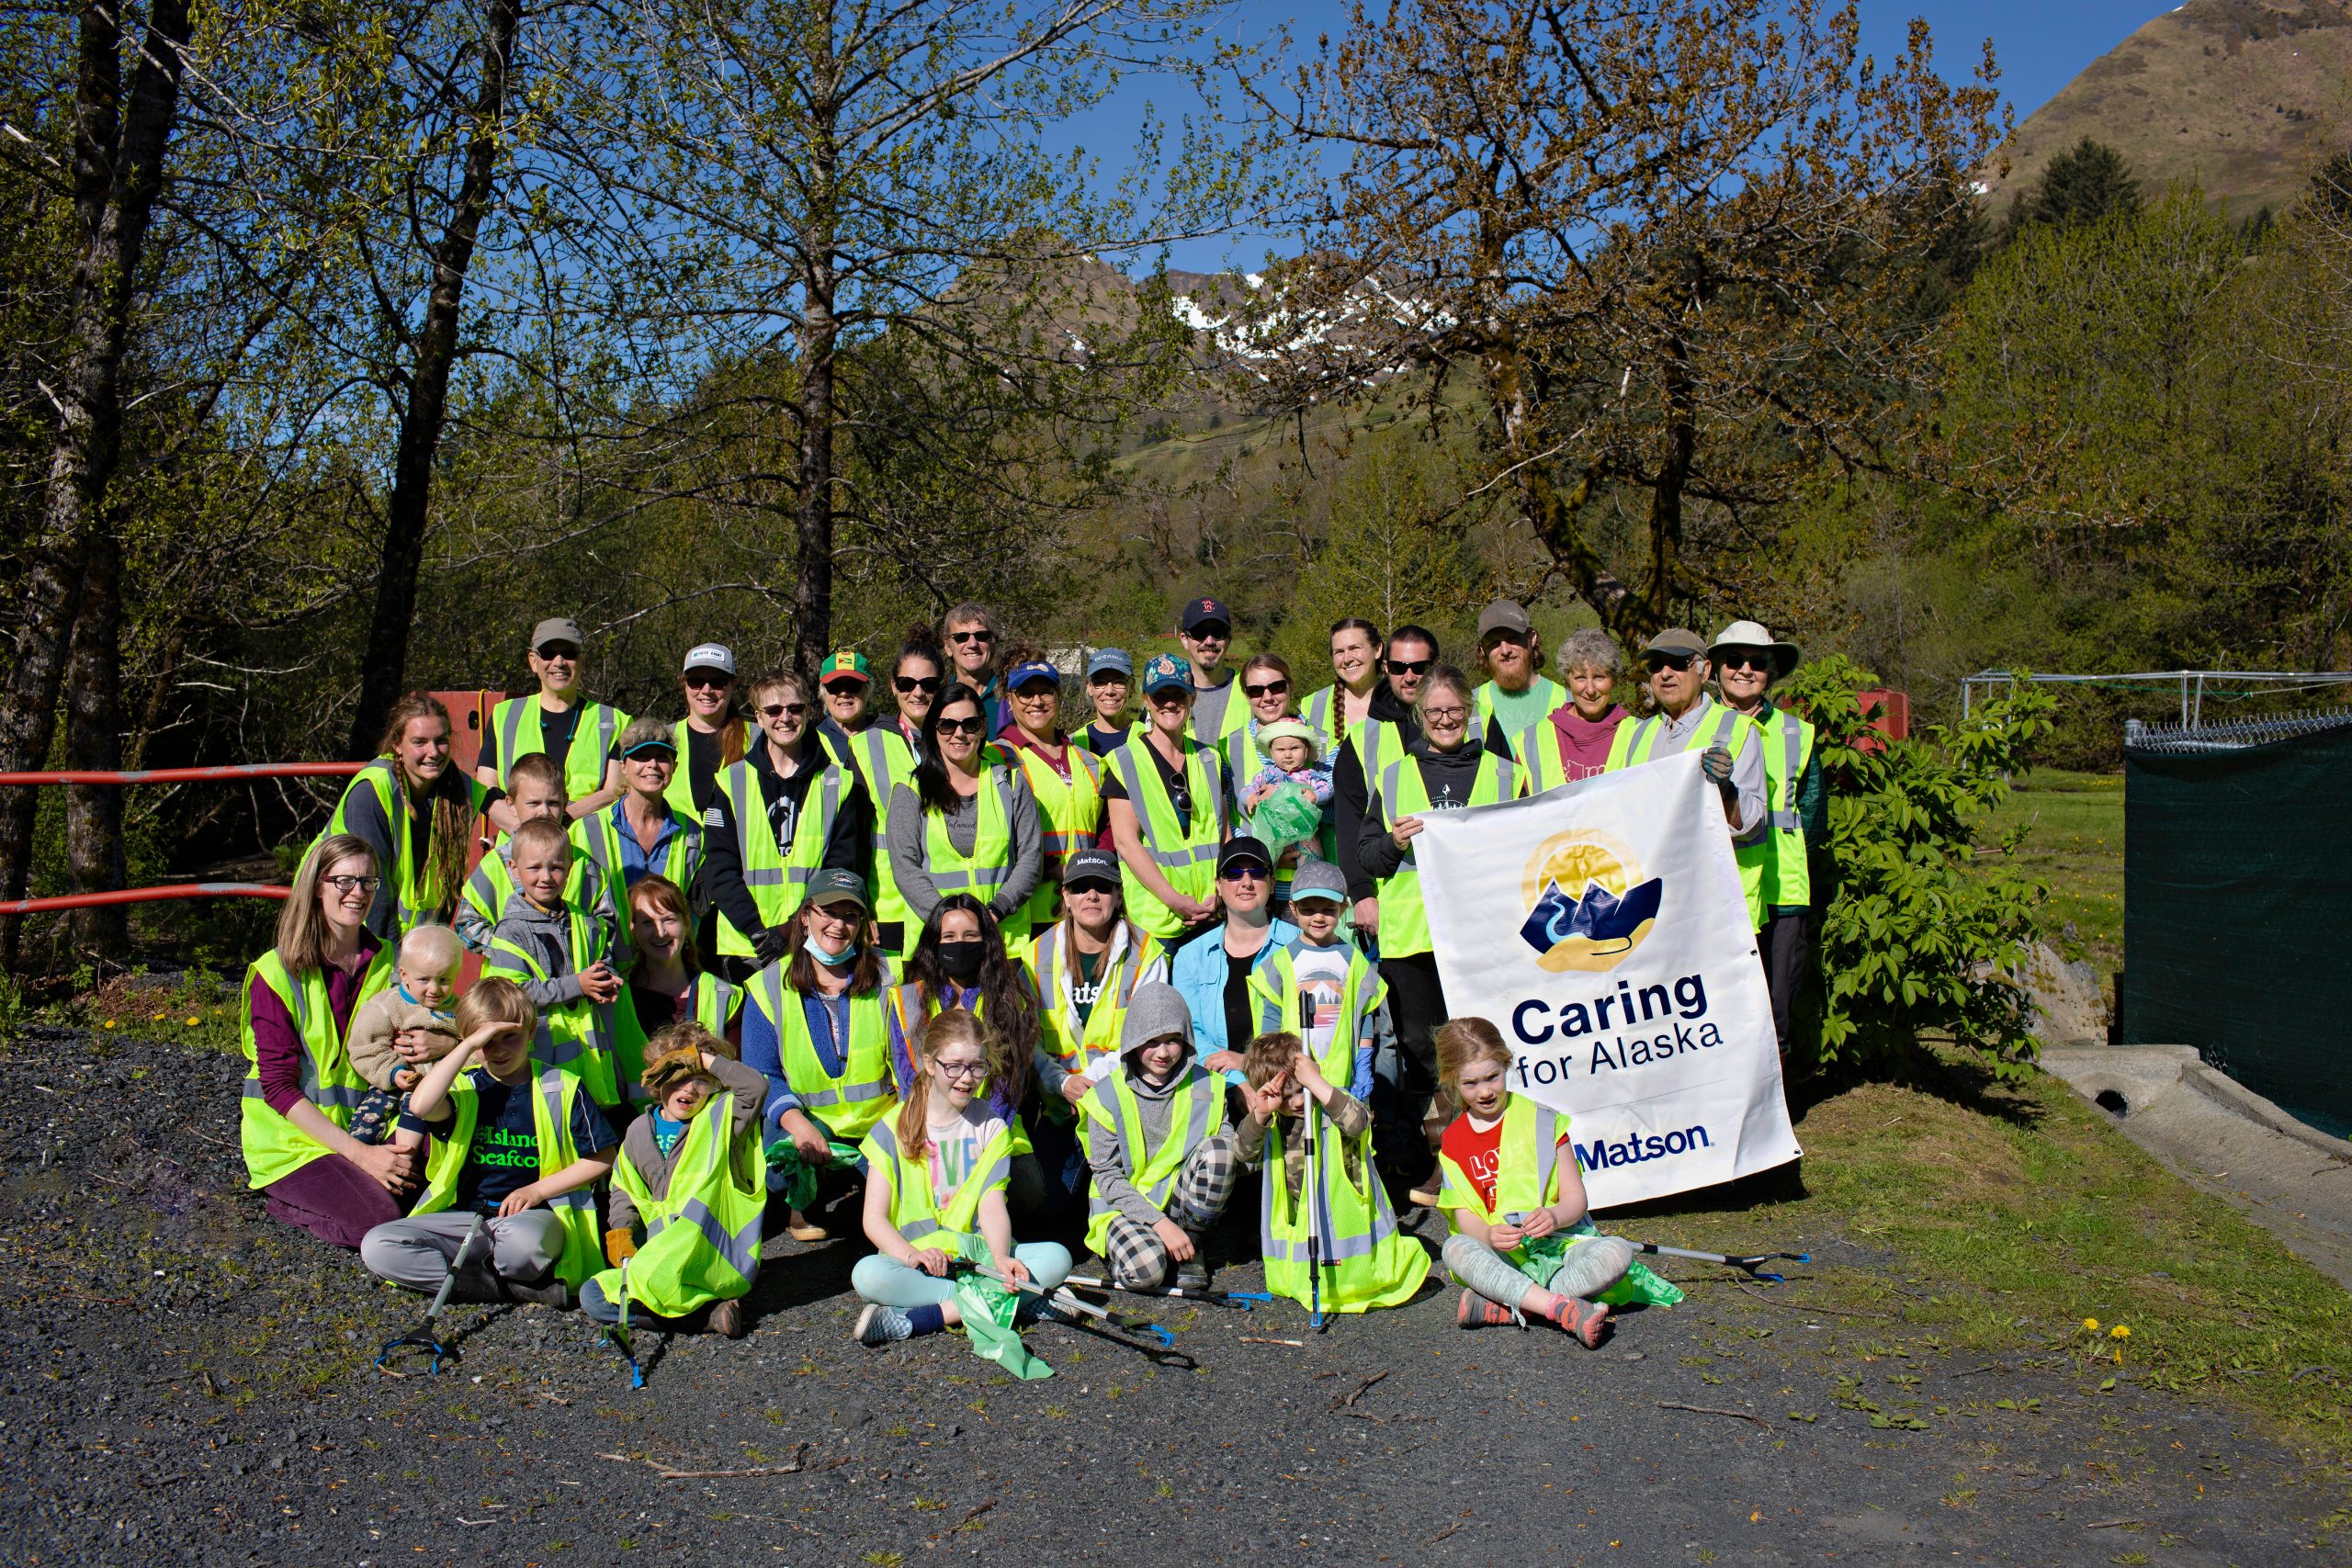 Volunteers wearing their yellow safety vests pose for a group picture with a Caring For Alaska banner.